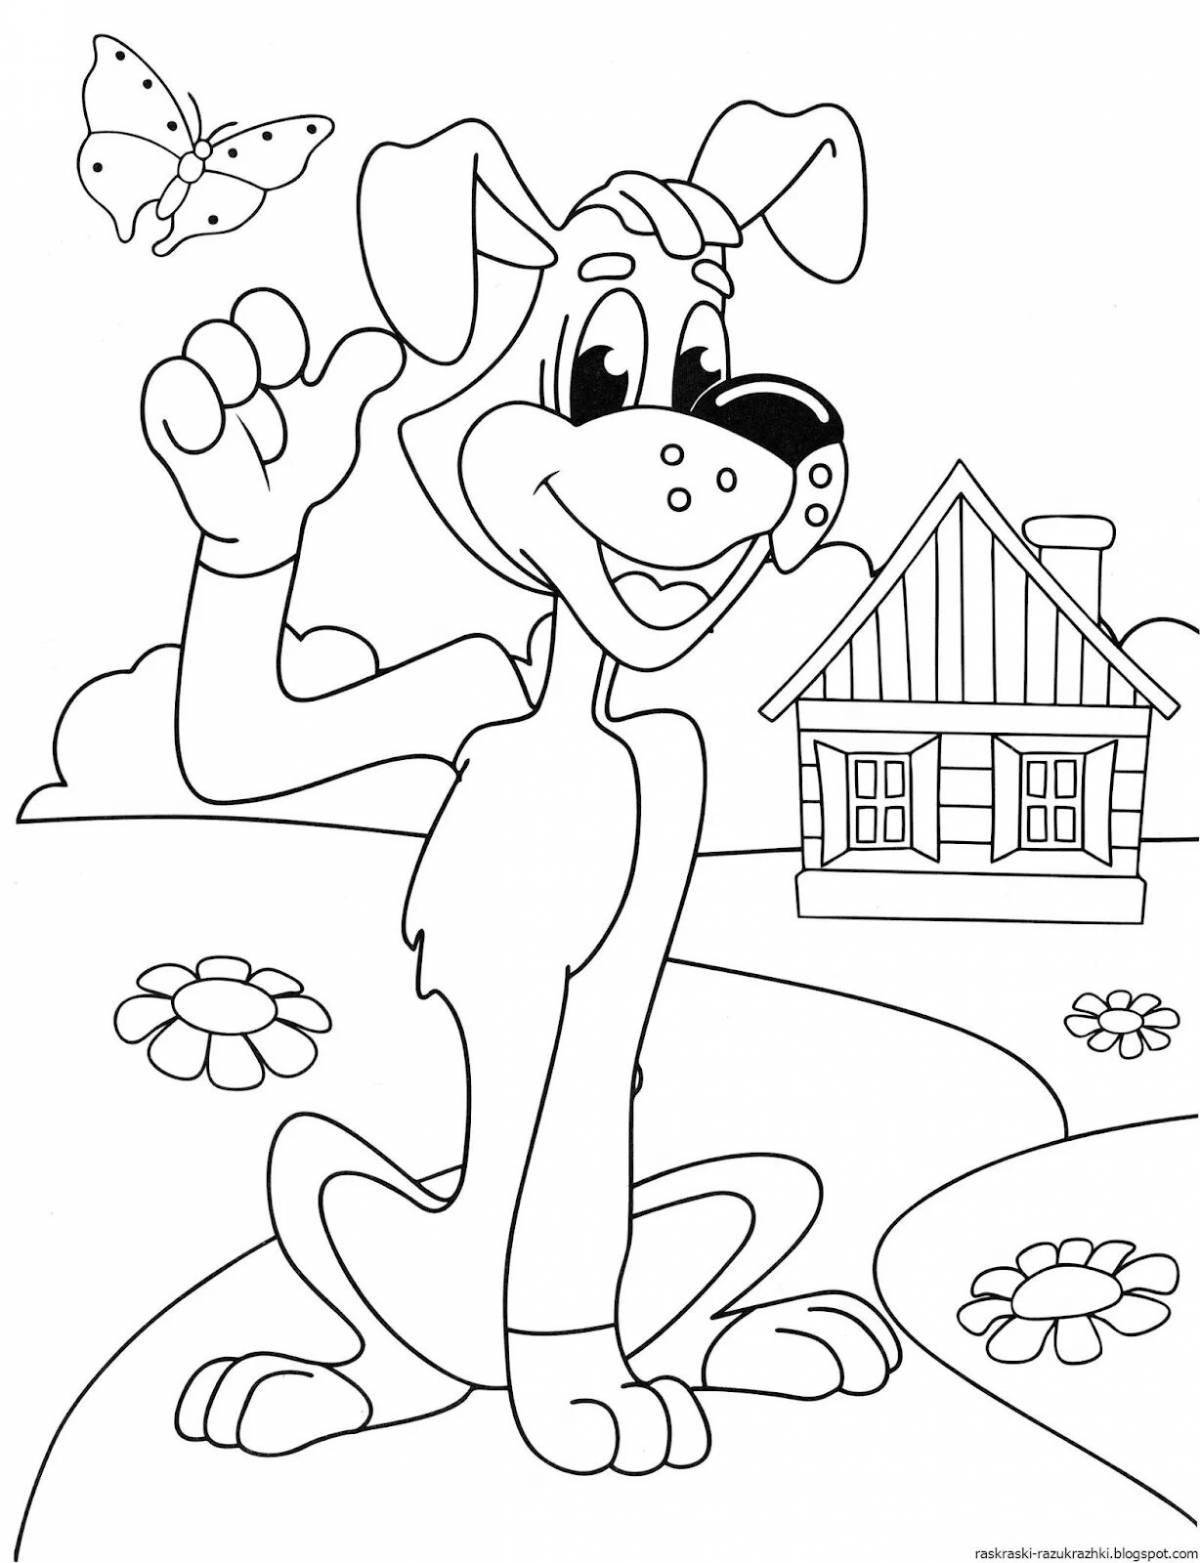 Marvelous sailor skin coloring page for toddlers